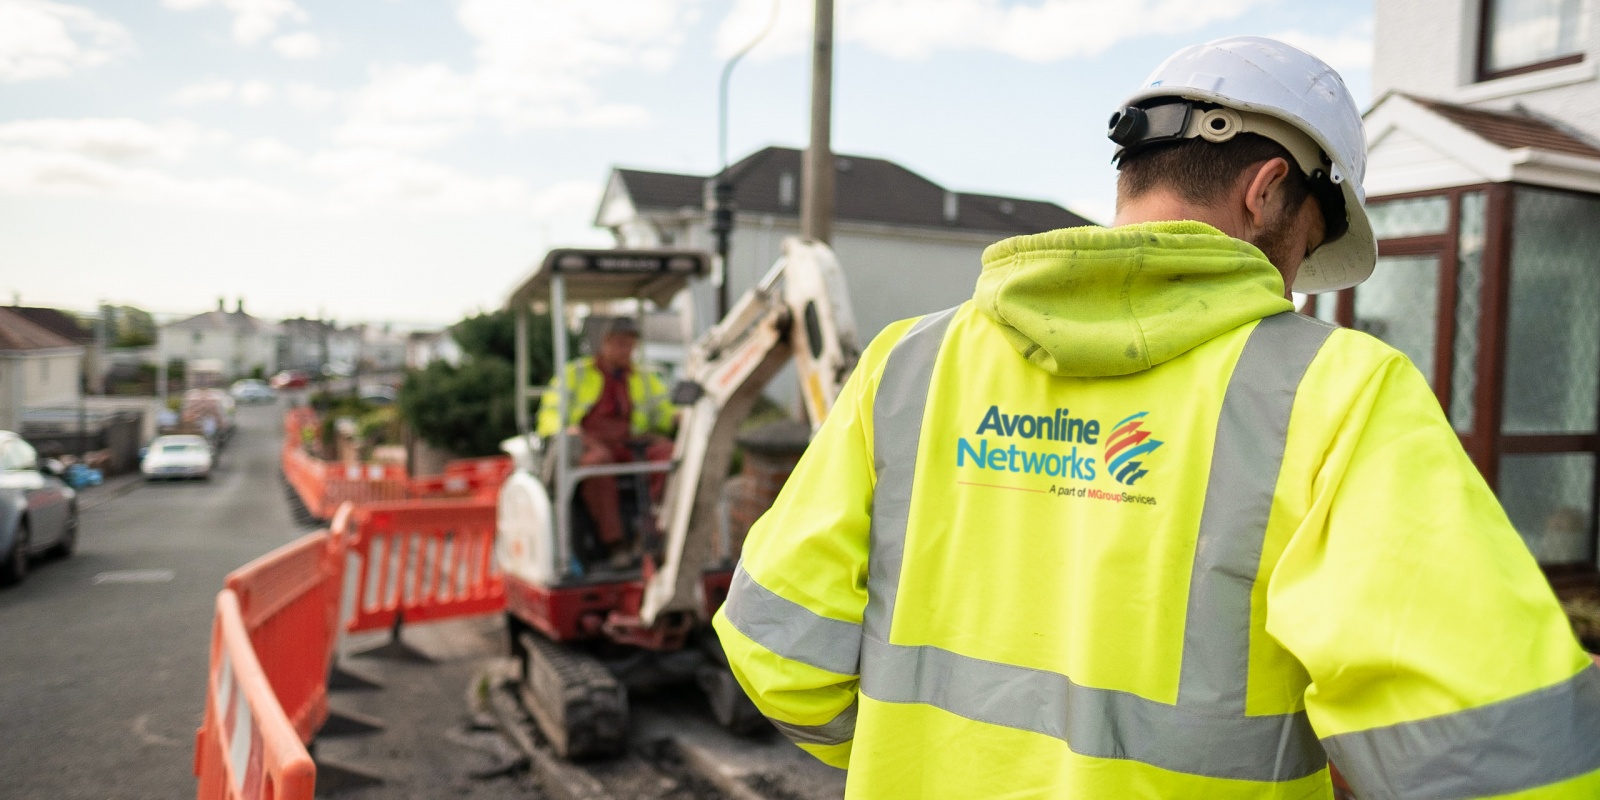 Avonline Networks Secures Growth with Virgin Media as part of its Network Expansion Programme